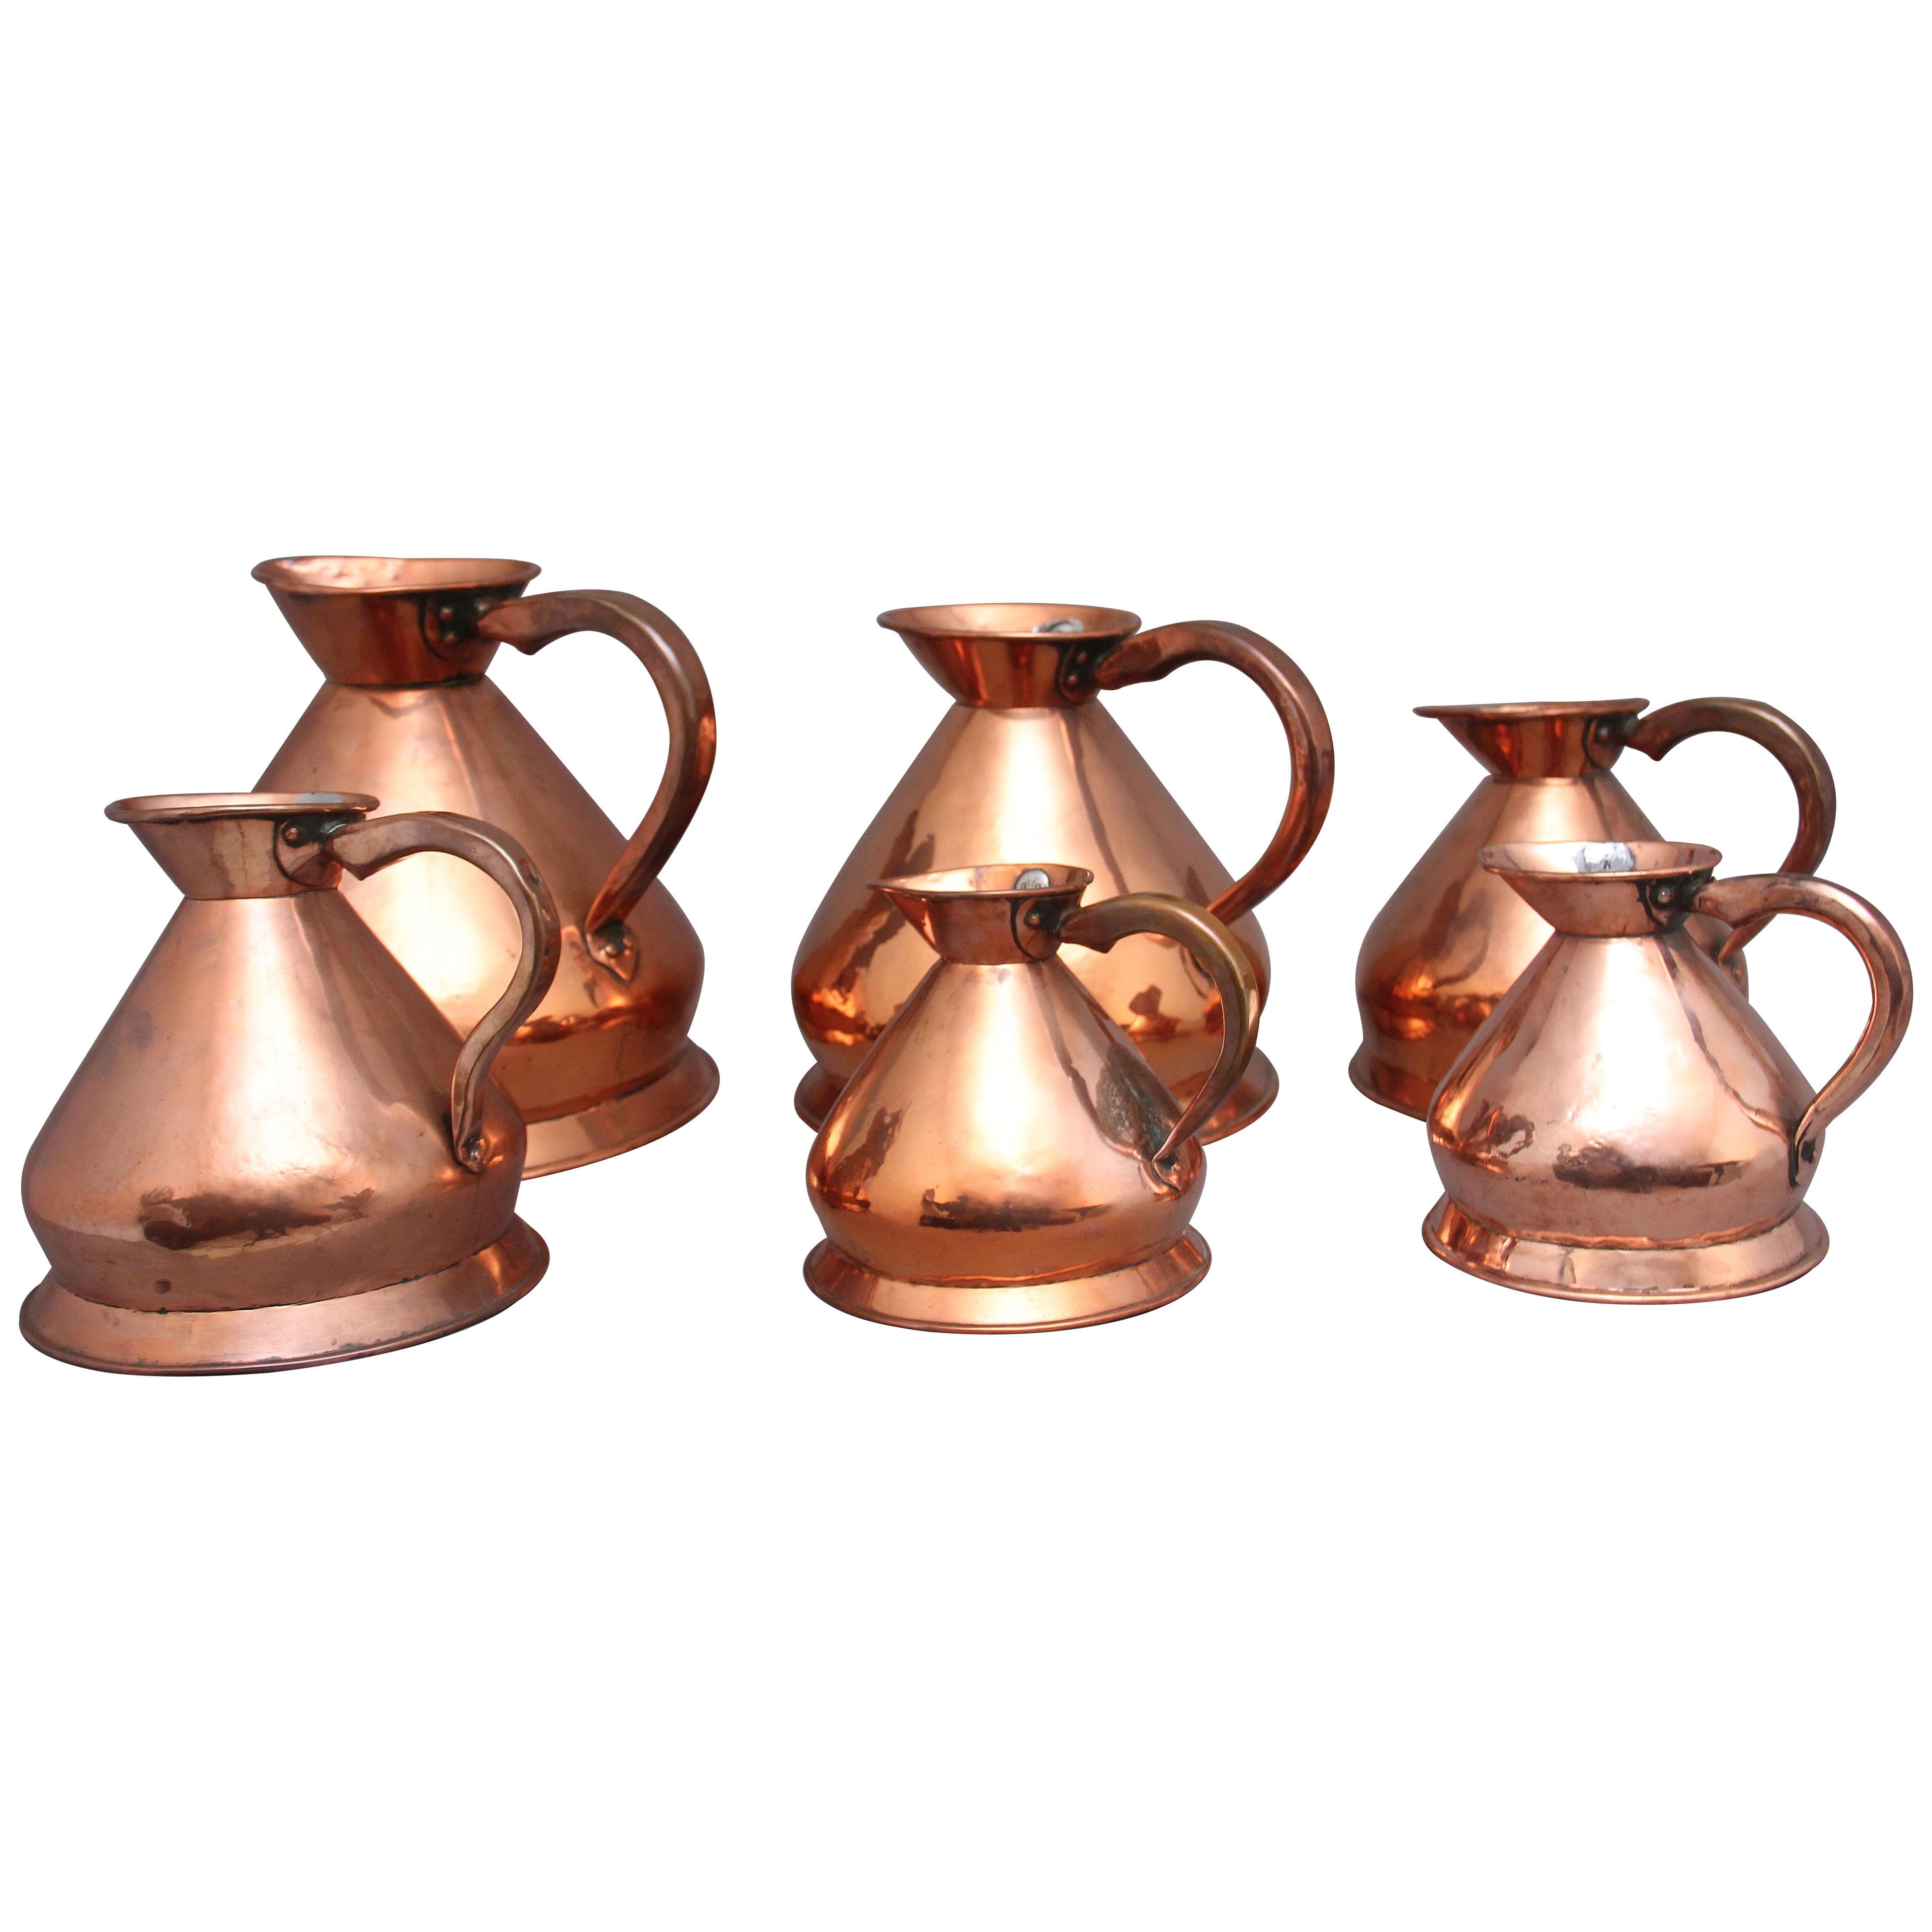 A set of six highly decorative 19th Century copper measuring jugs